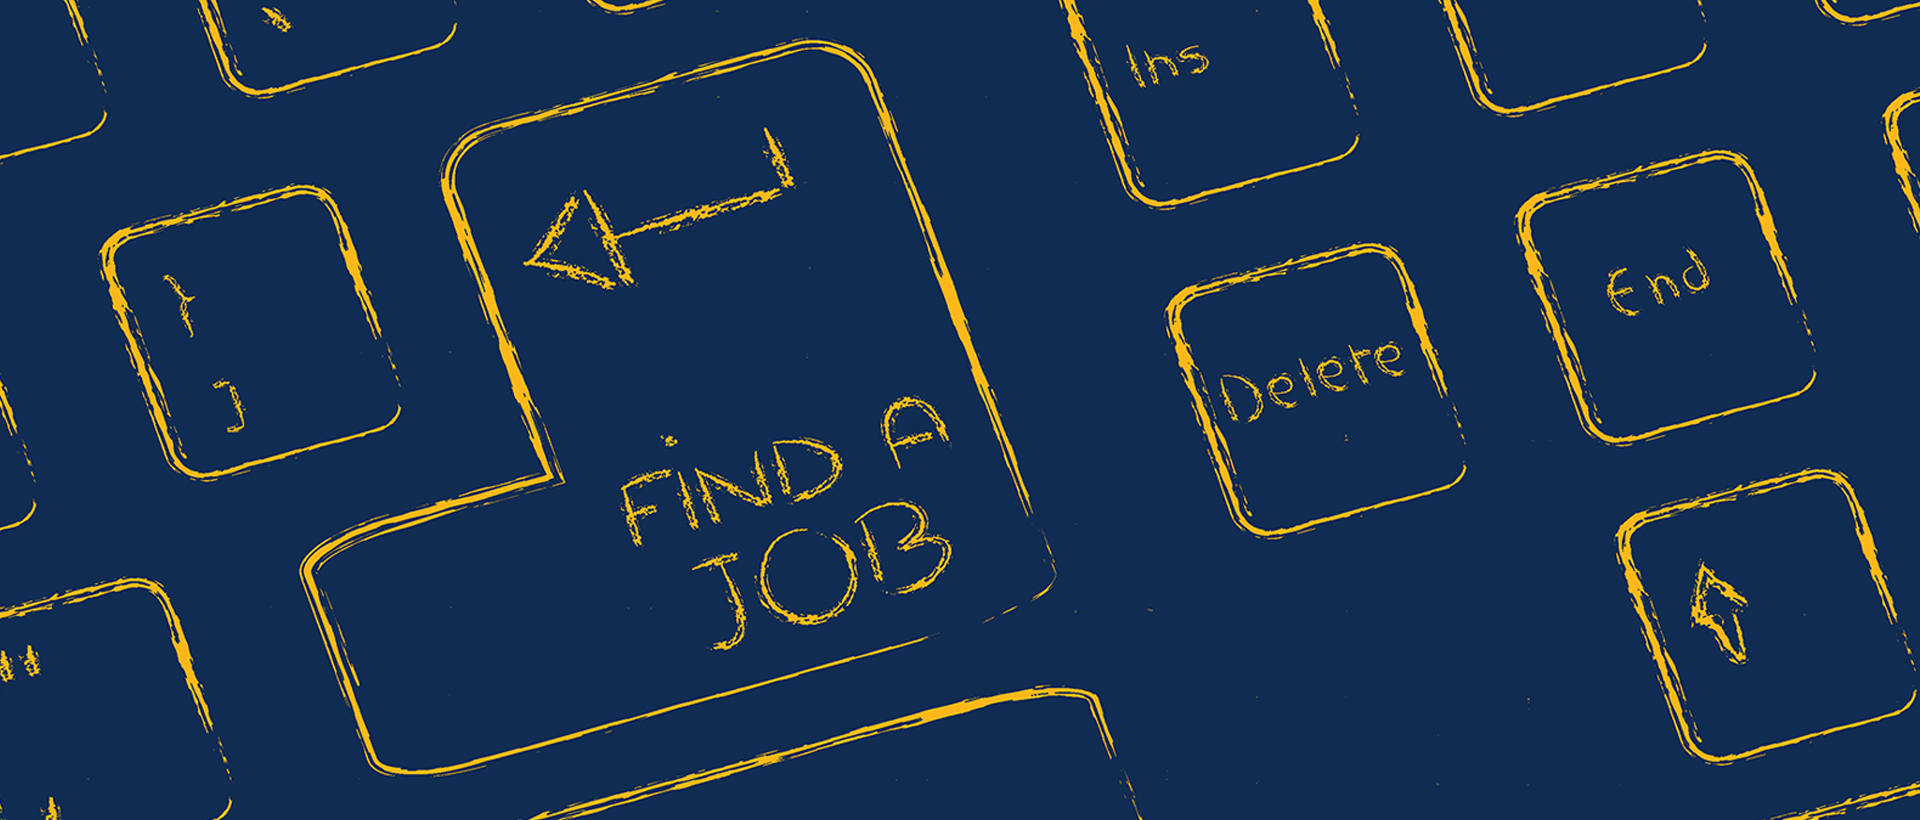 stylized illustration of a keyboard that says "find a job"